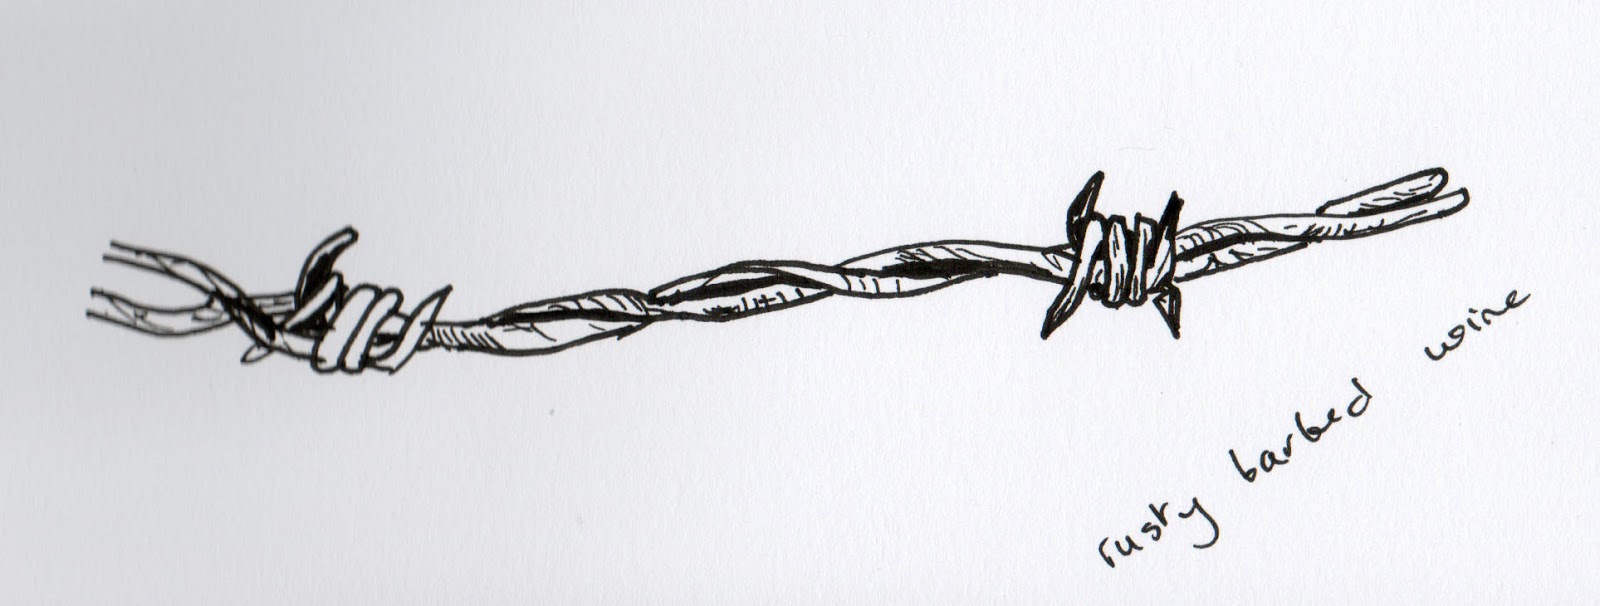 1600x606 barb wire drawing, pencil, sketch, colorful, realistic art images ...